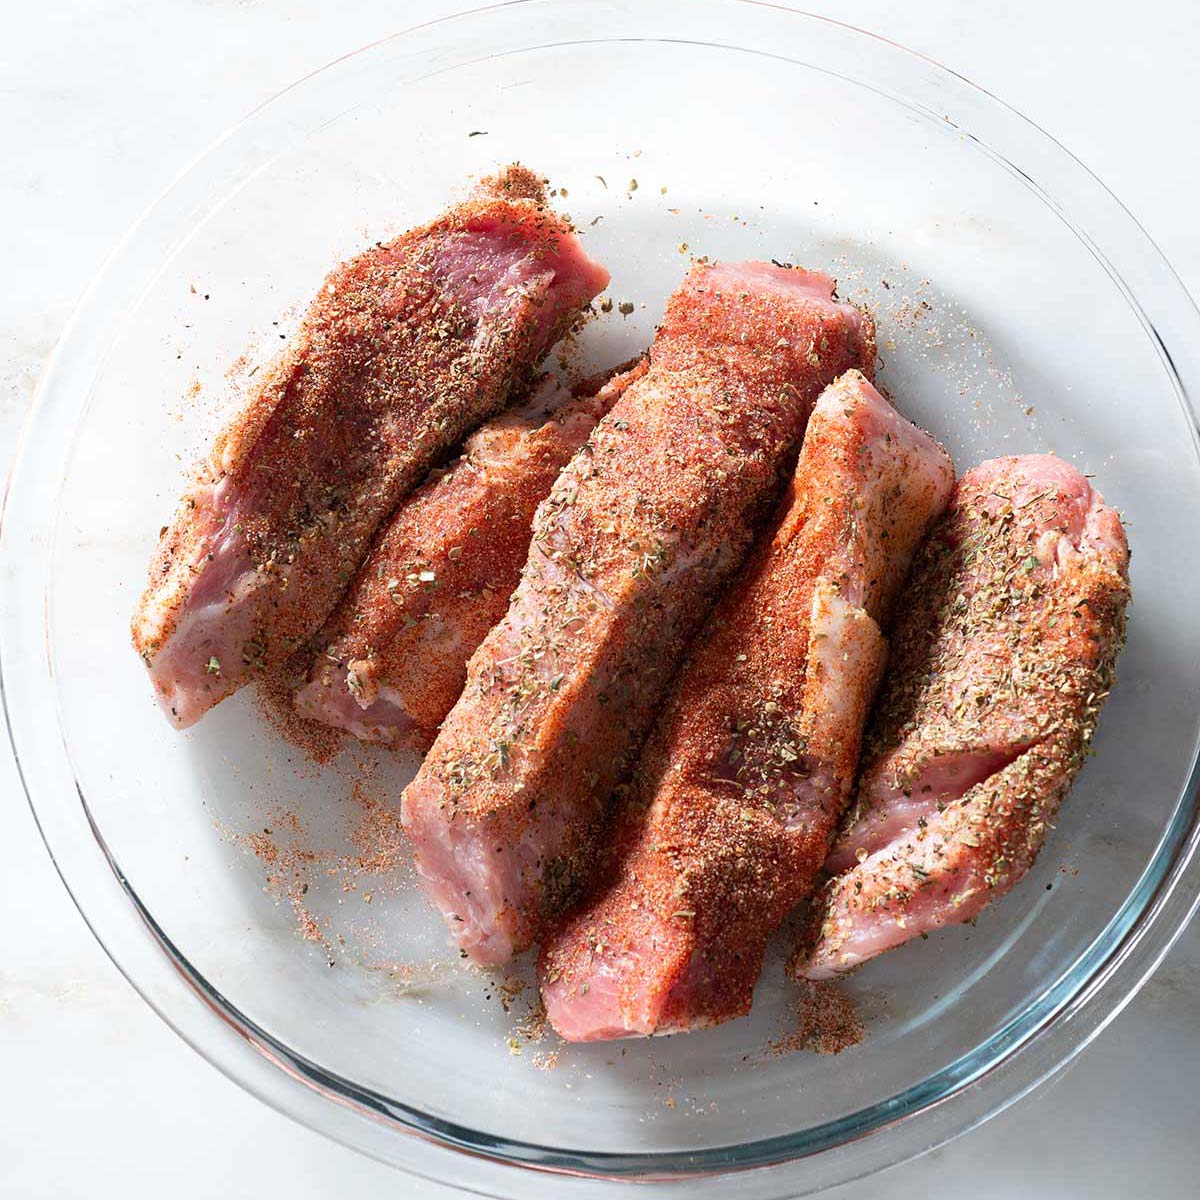 Raw spice-rubbed boneless ribs on a glass plate.